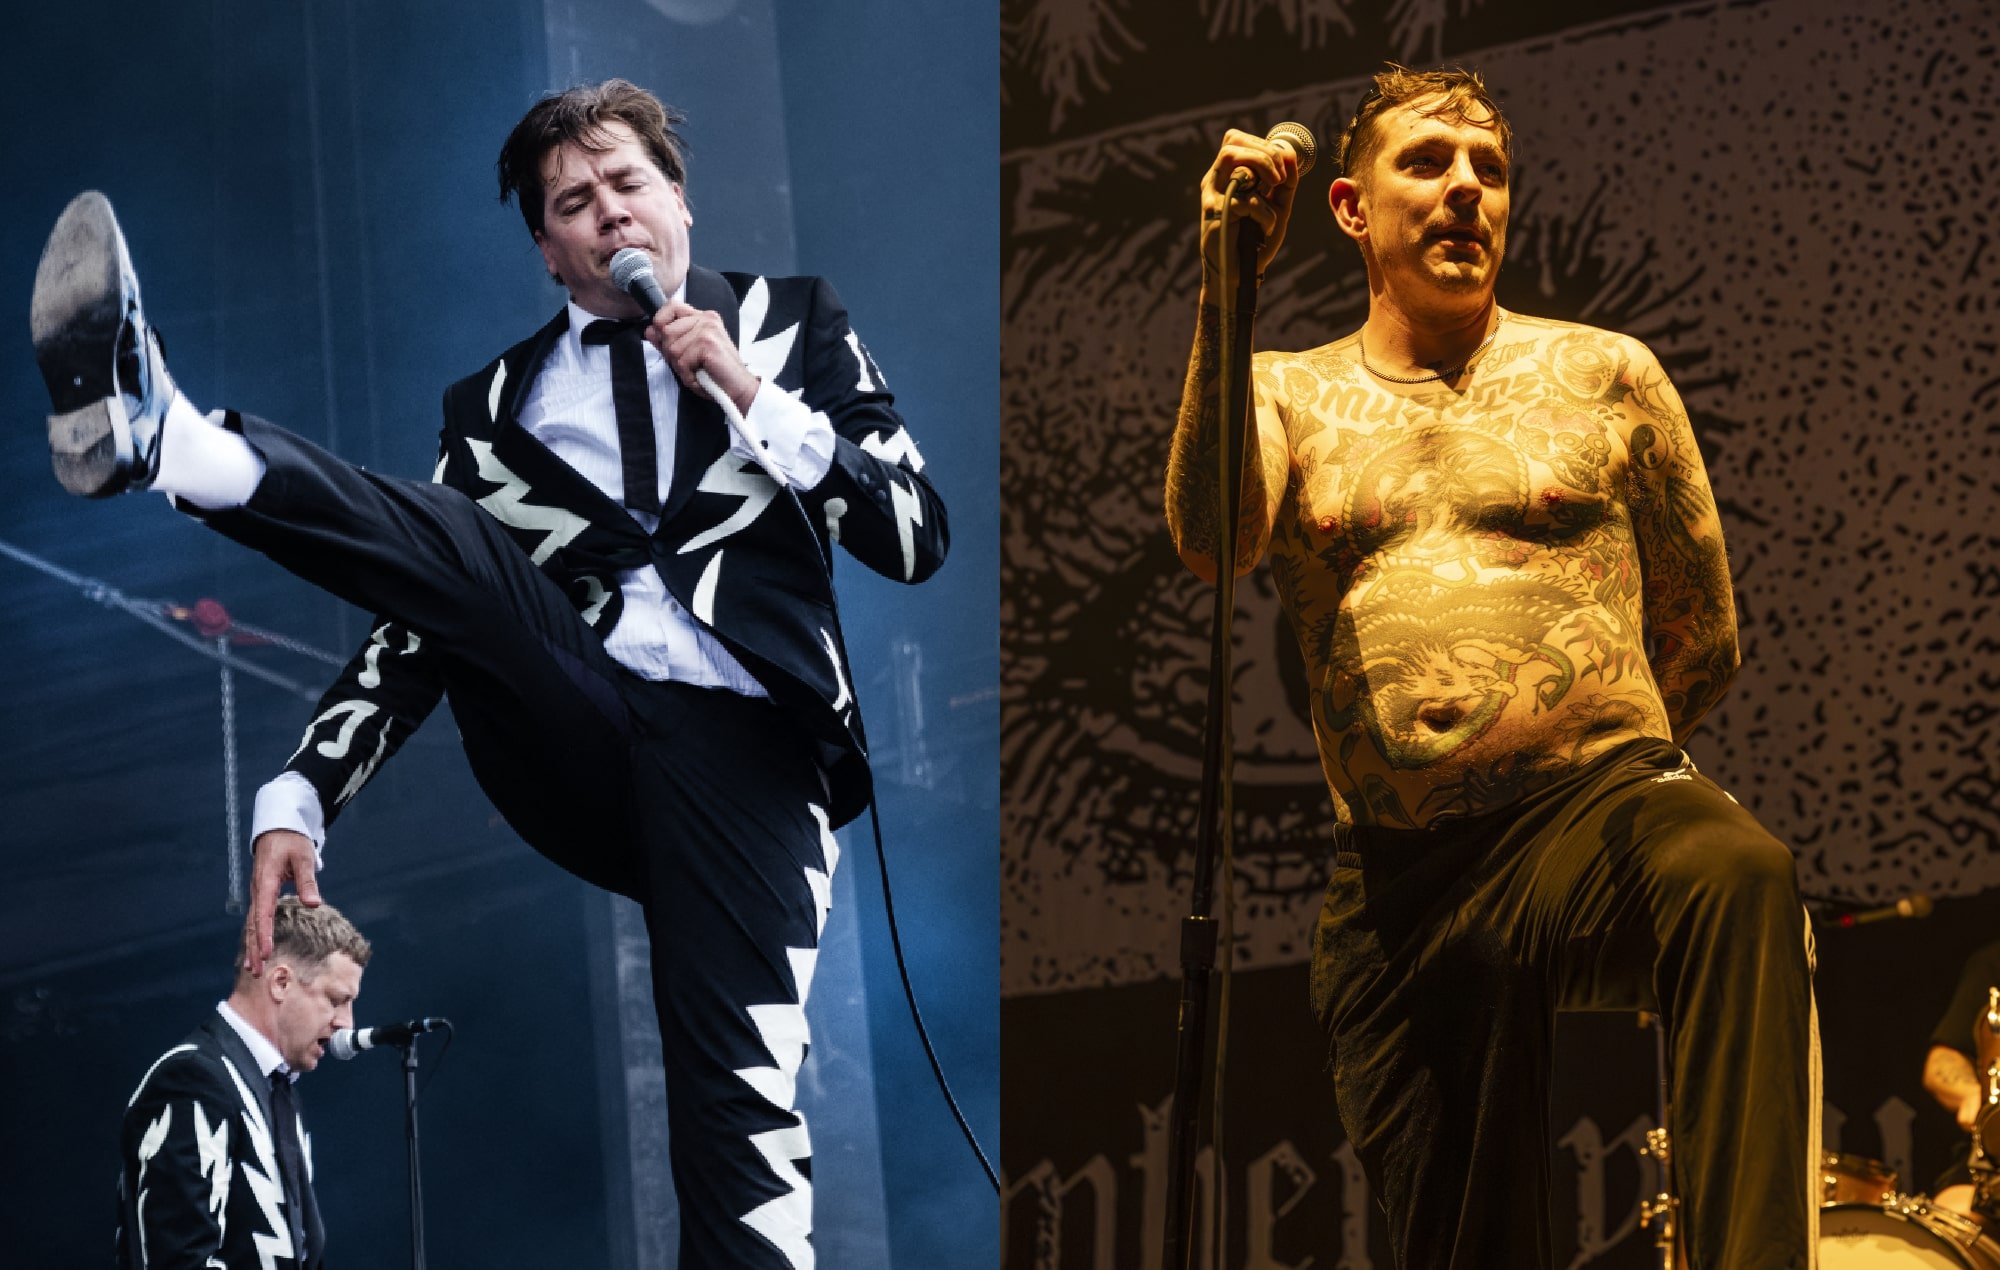 The Hives and Viagra Boys are at war